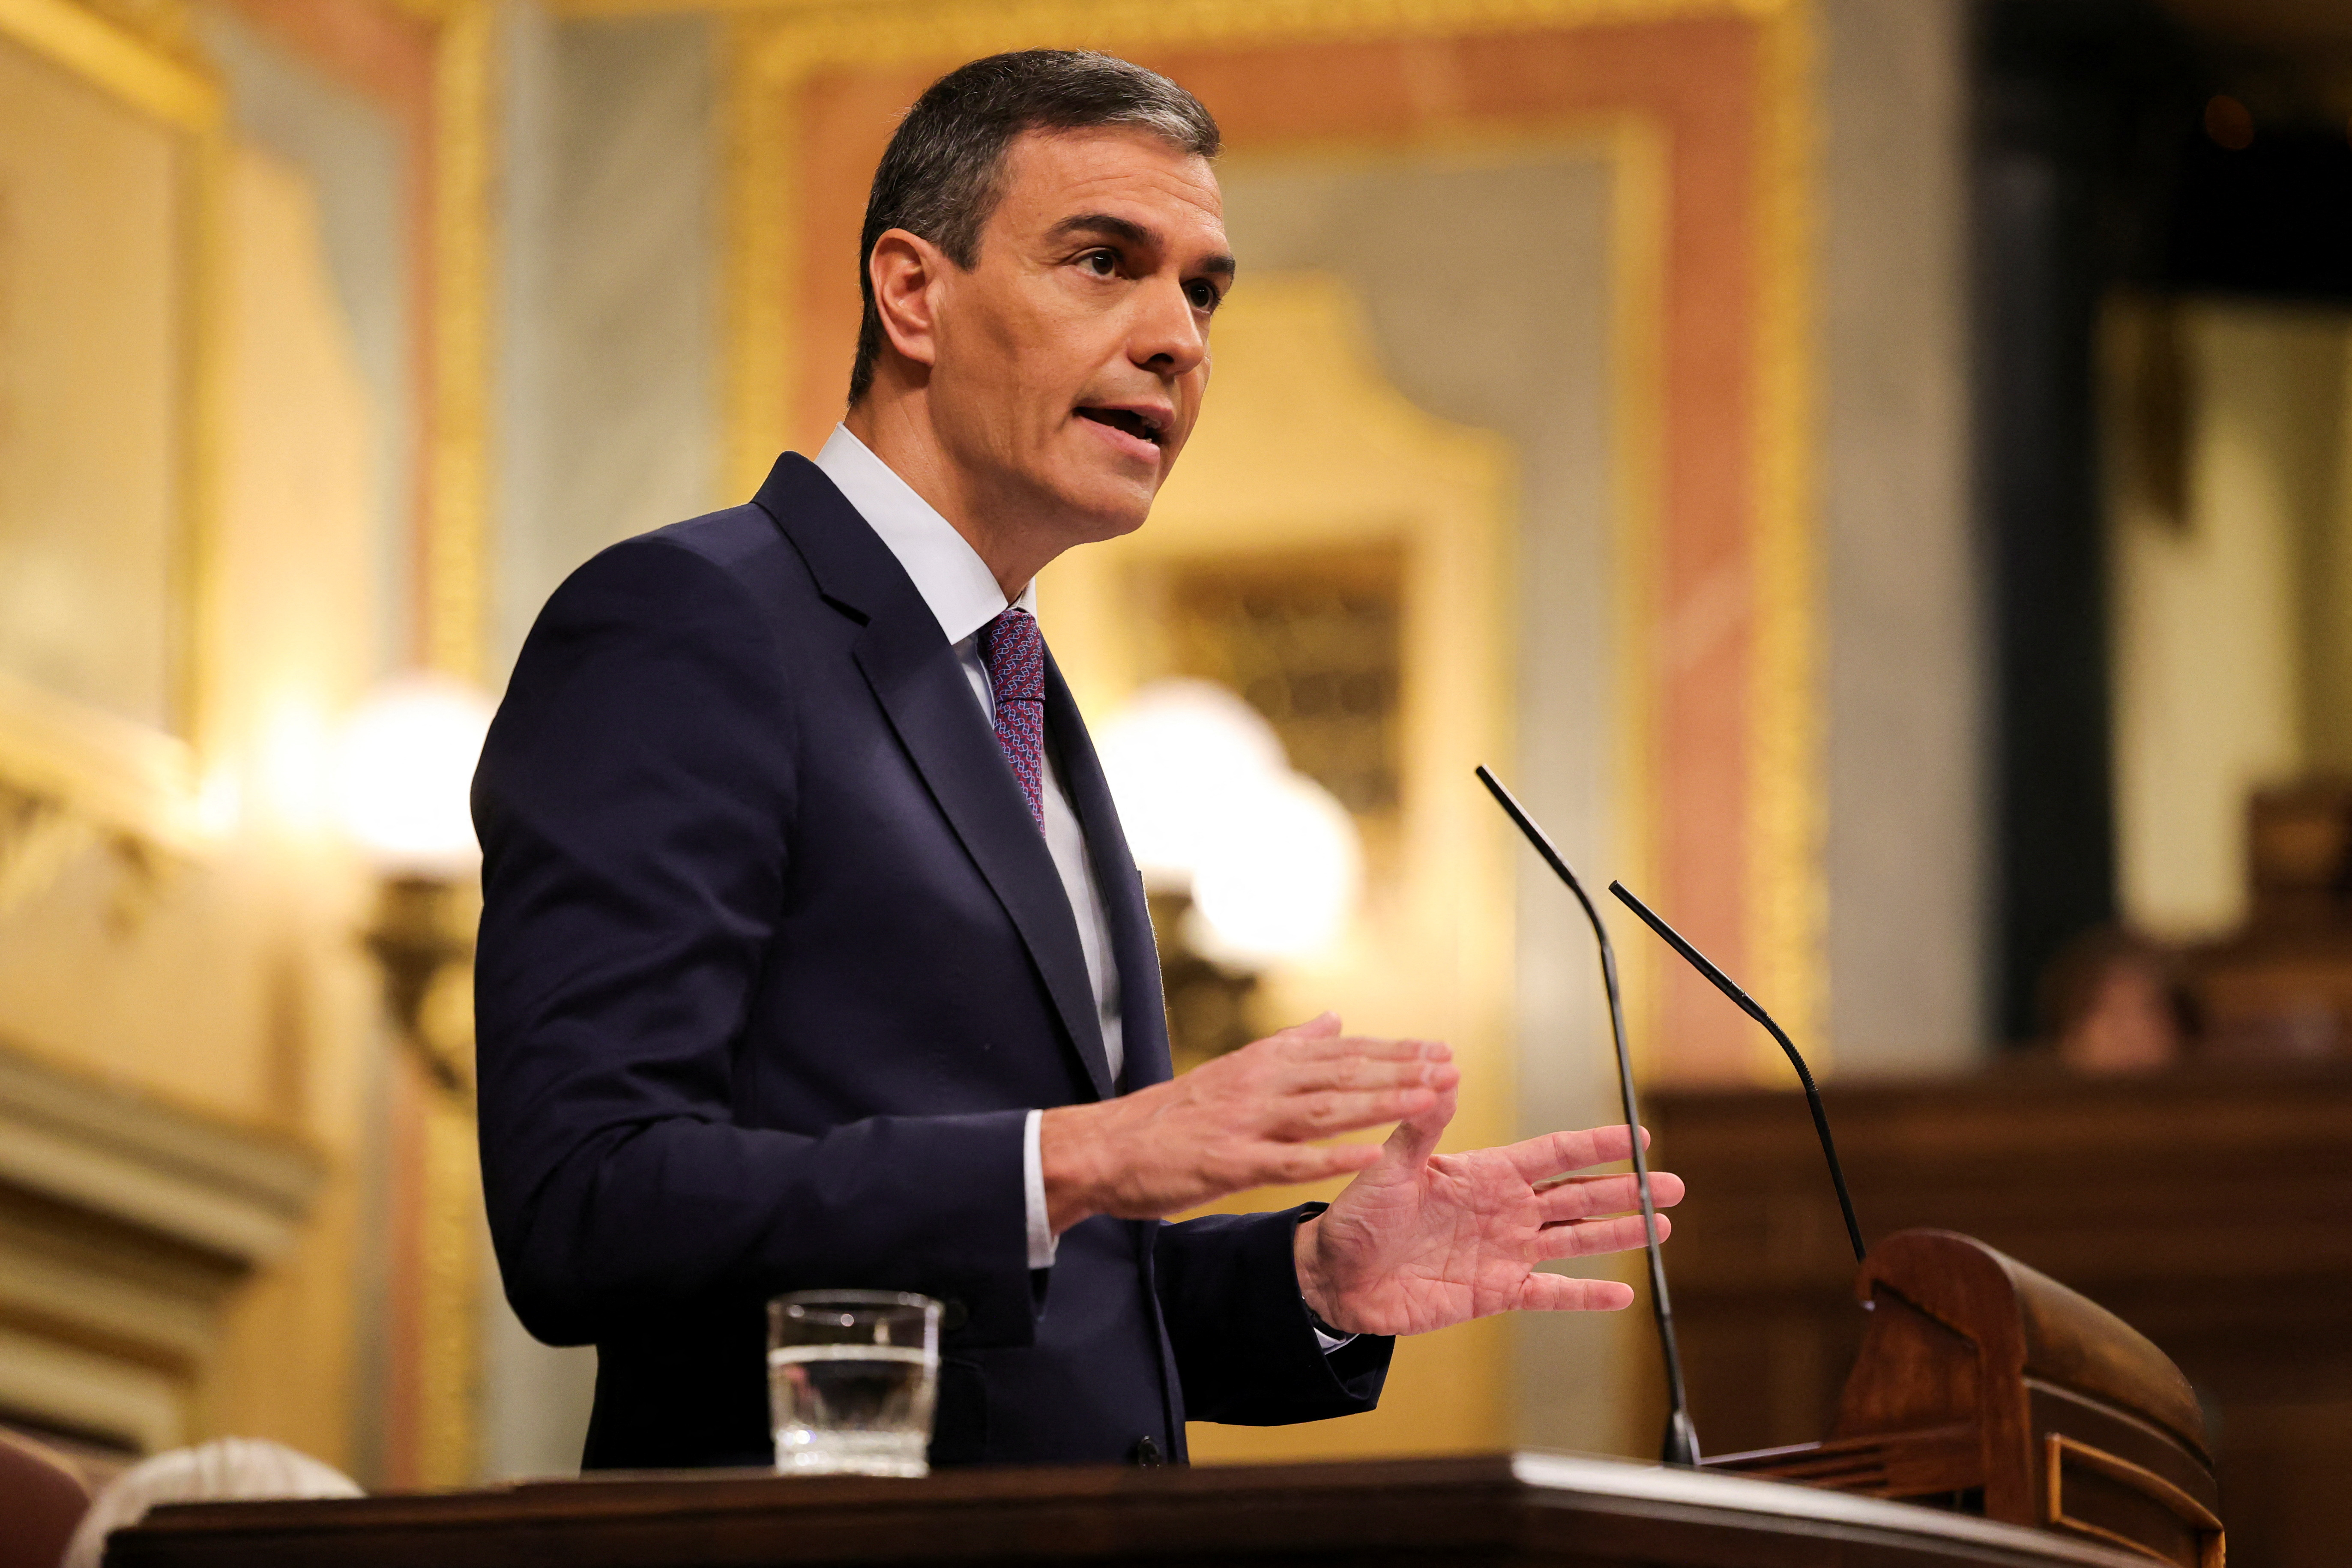 Spanish Prime Minister Pedro Sanchez announces that the country's council of ministers would recognise an independent Palestinian state during a plenary session of the lower house of the Spanish parliament, in Madrid, Spain, on May 22.